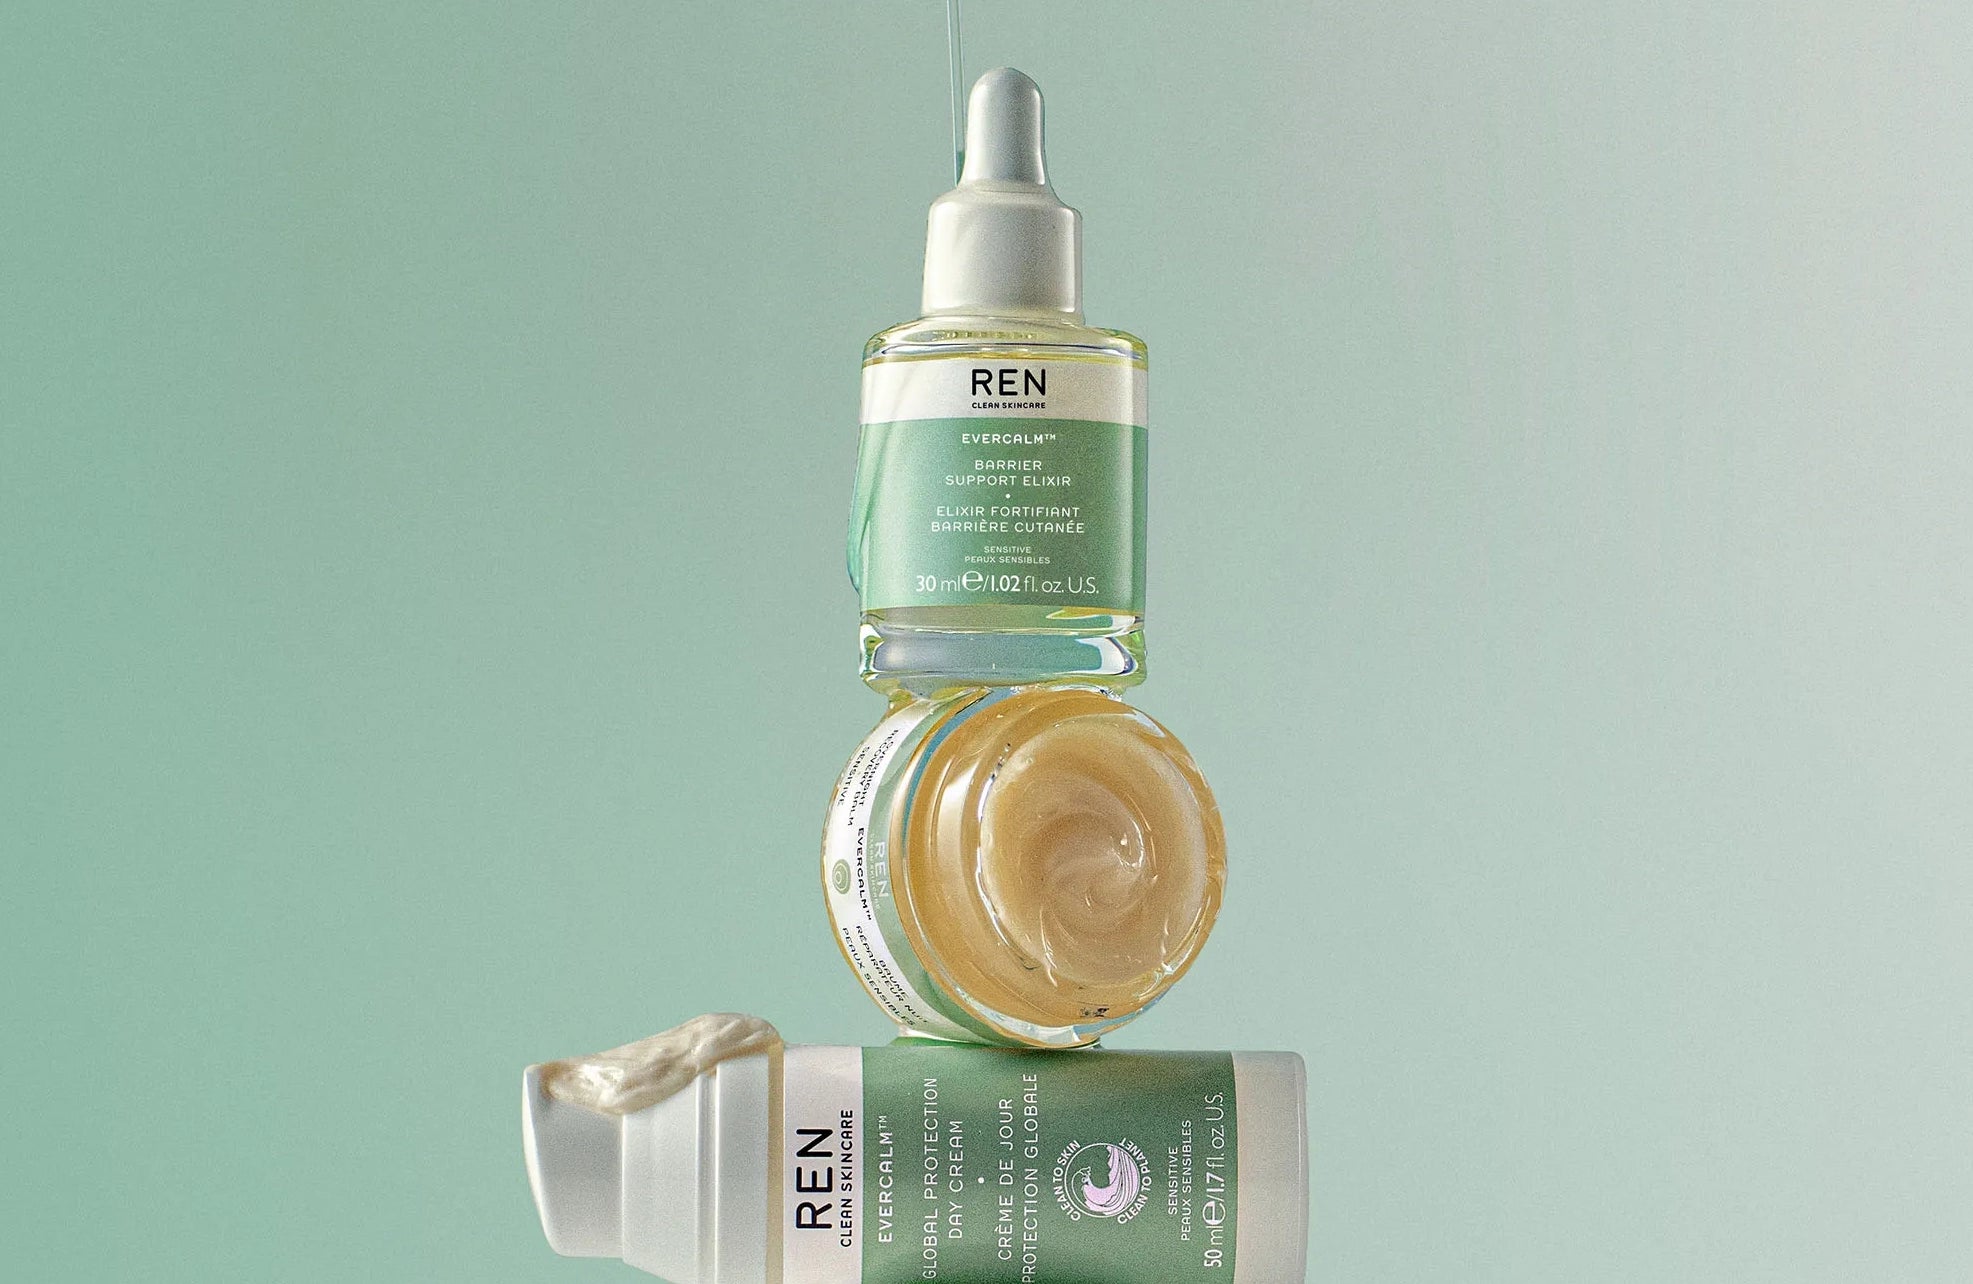 Ren Clean Skincare: A Commitment to Natural, Safe Ingredients